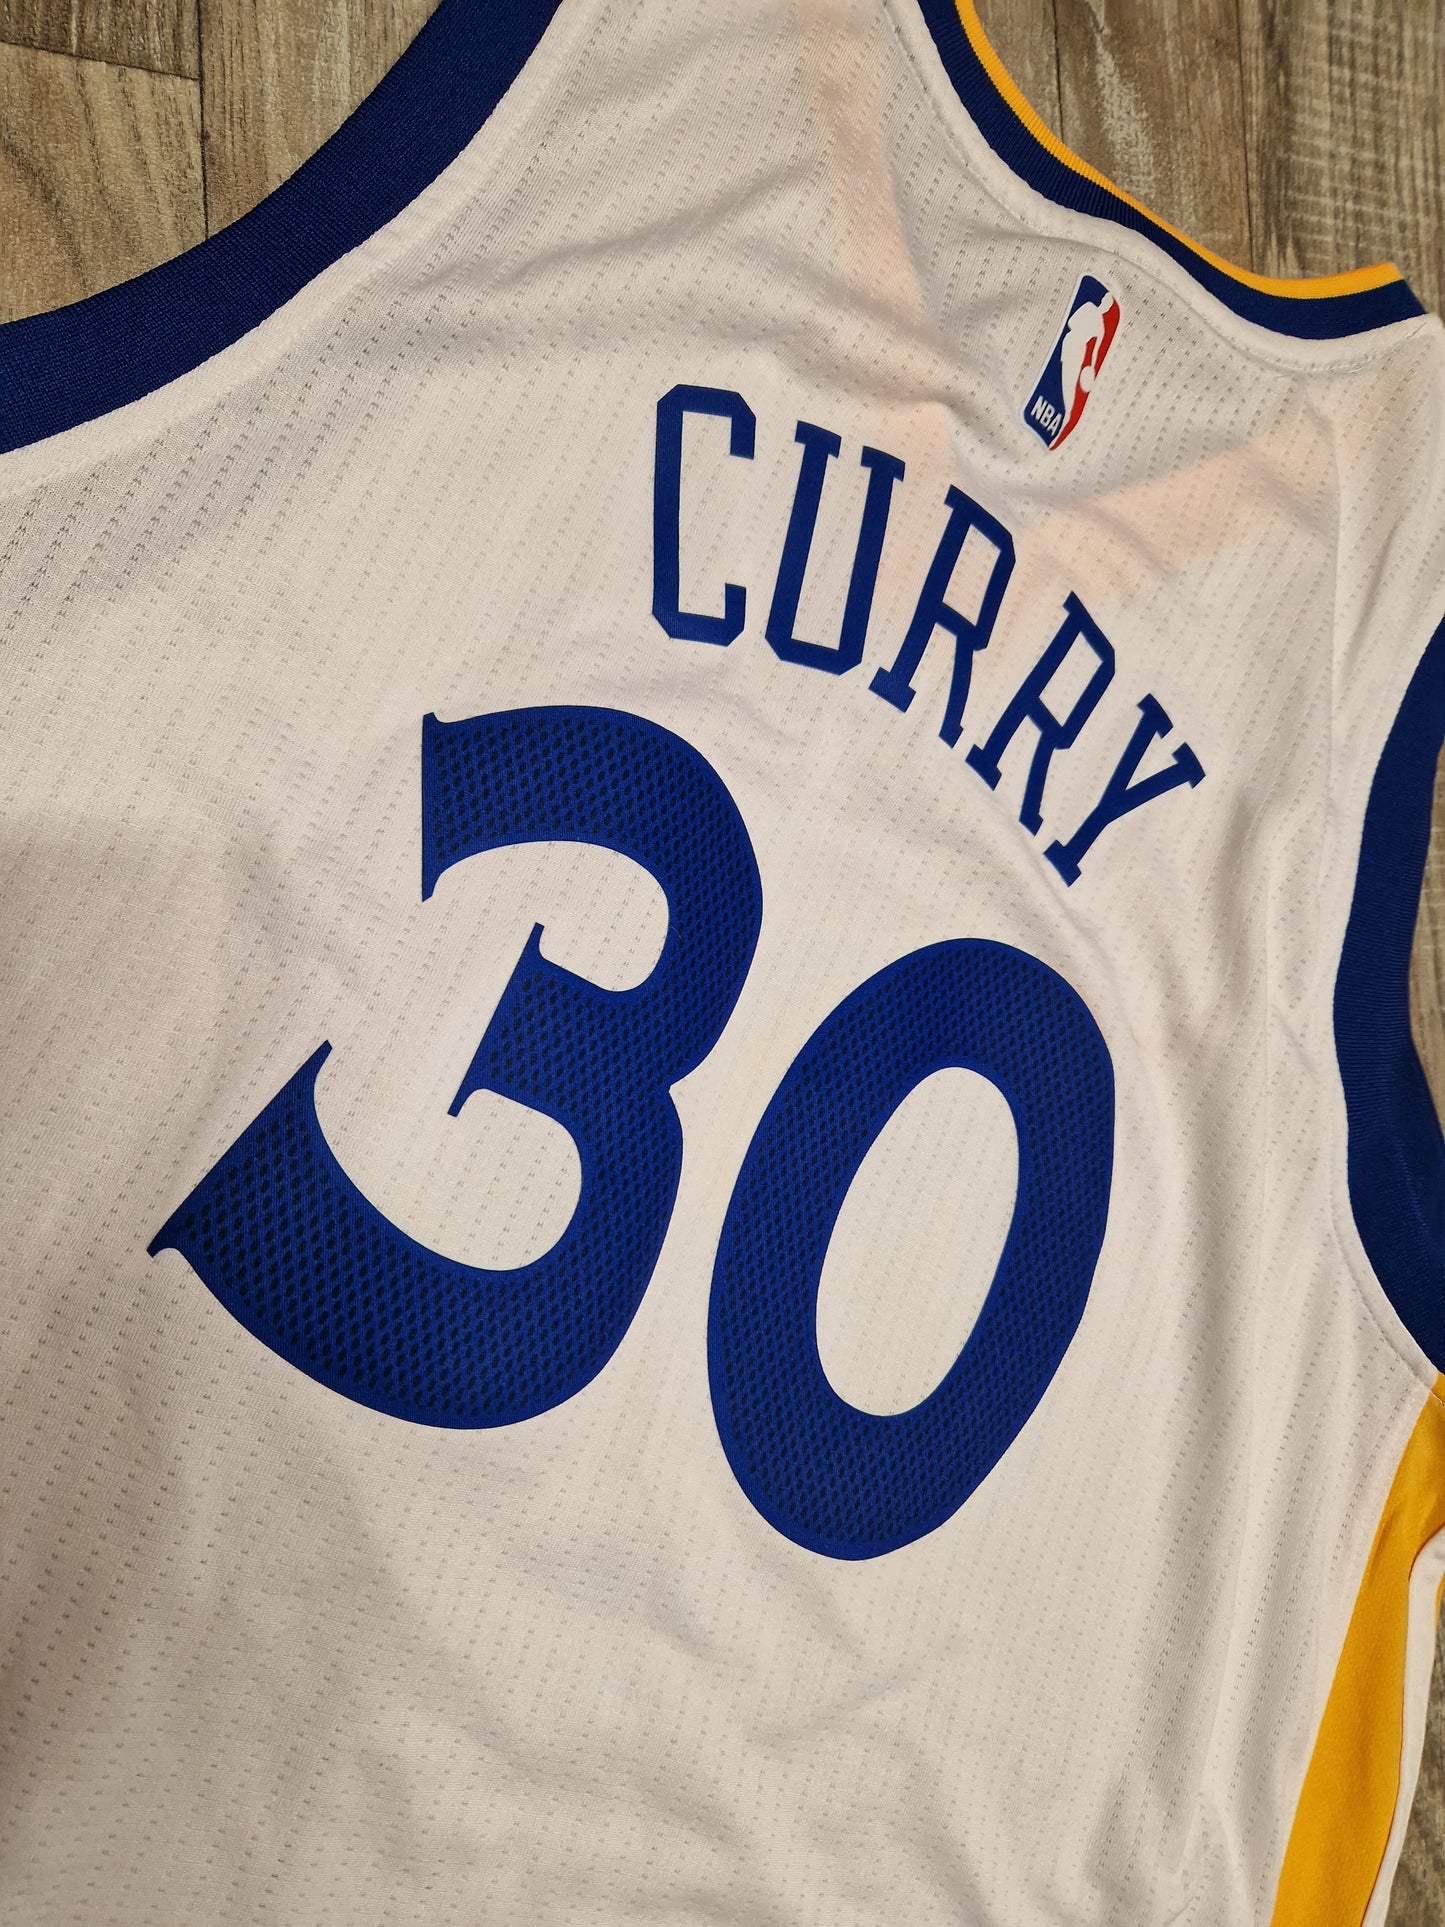 Steph Curry Golden State Warriors Jersey Size Large